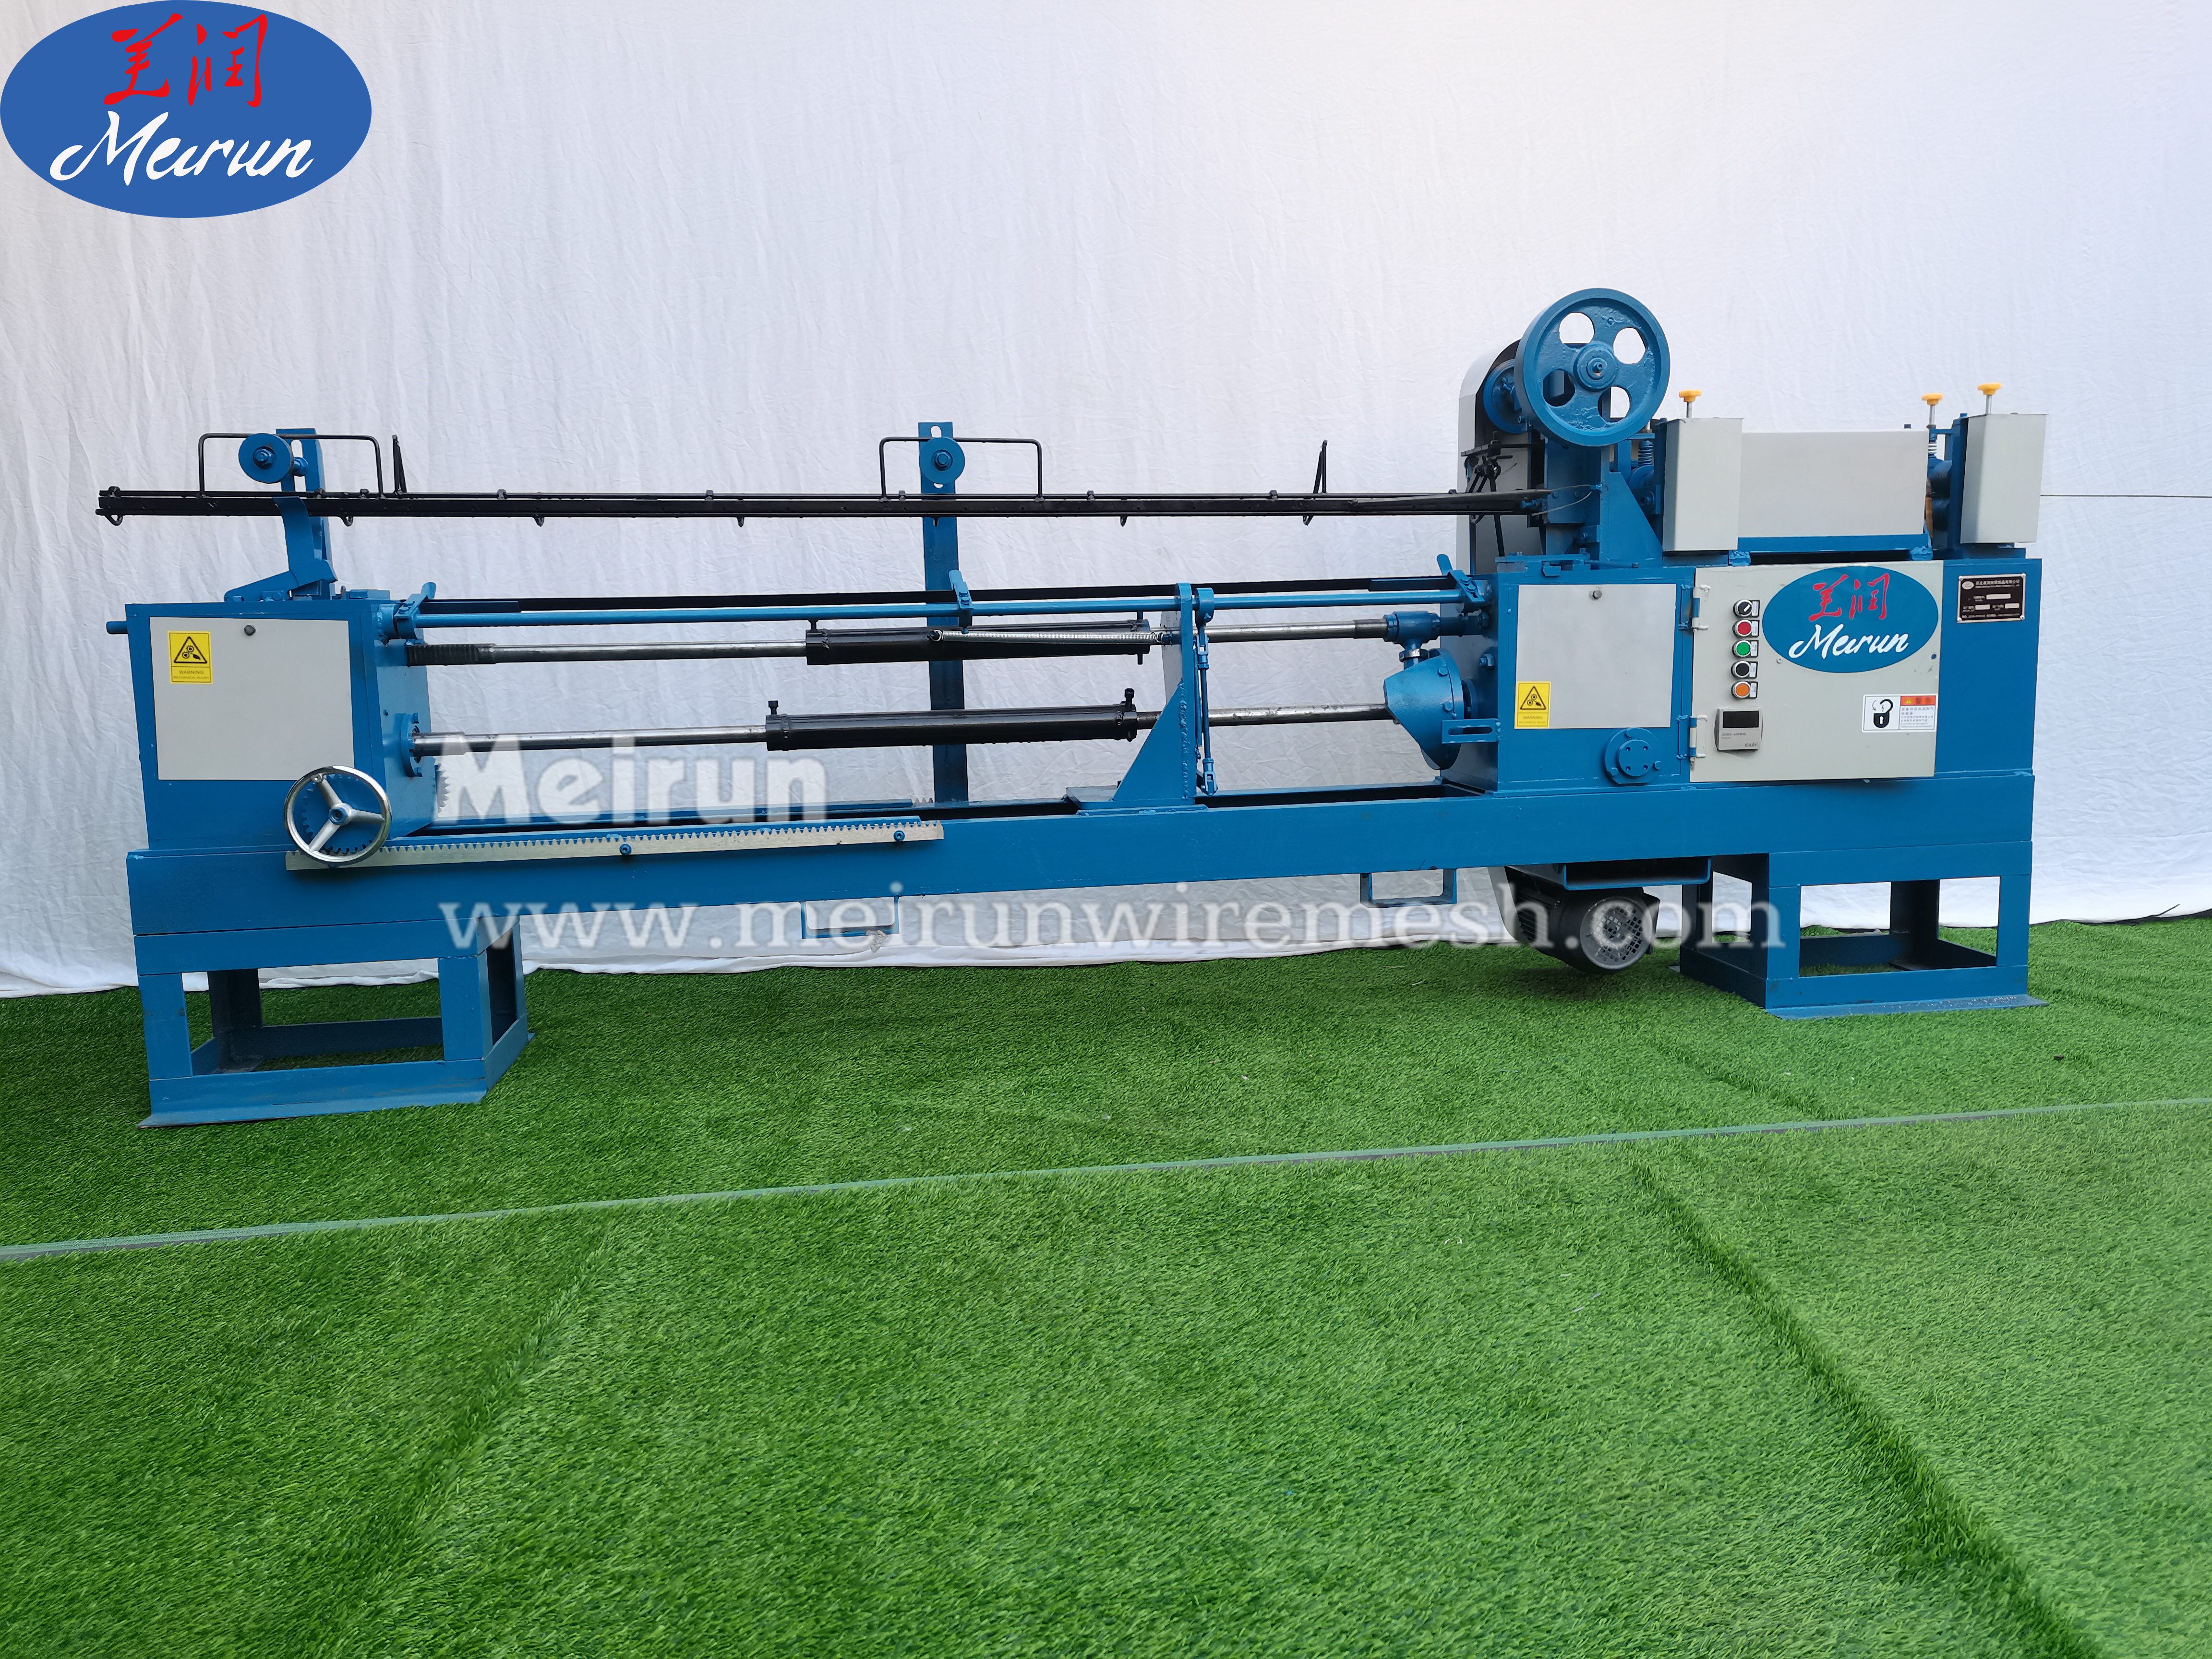 Manufacturers Supply Steel Double-head Buckle Machine Cotton Bag Packing Line Equipment Wholesale